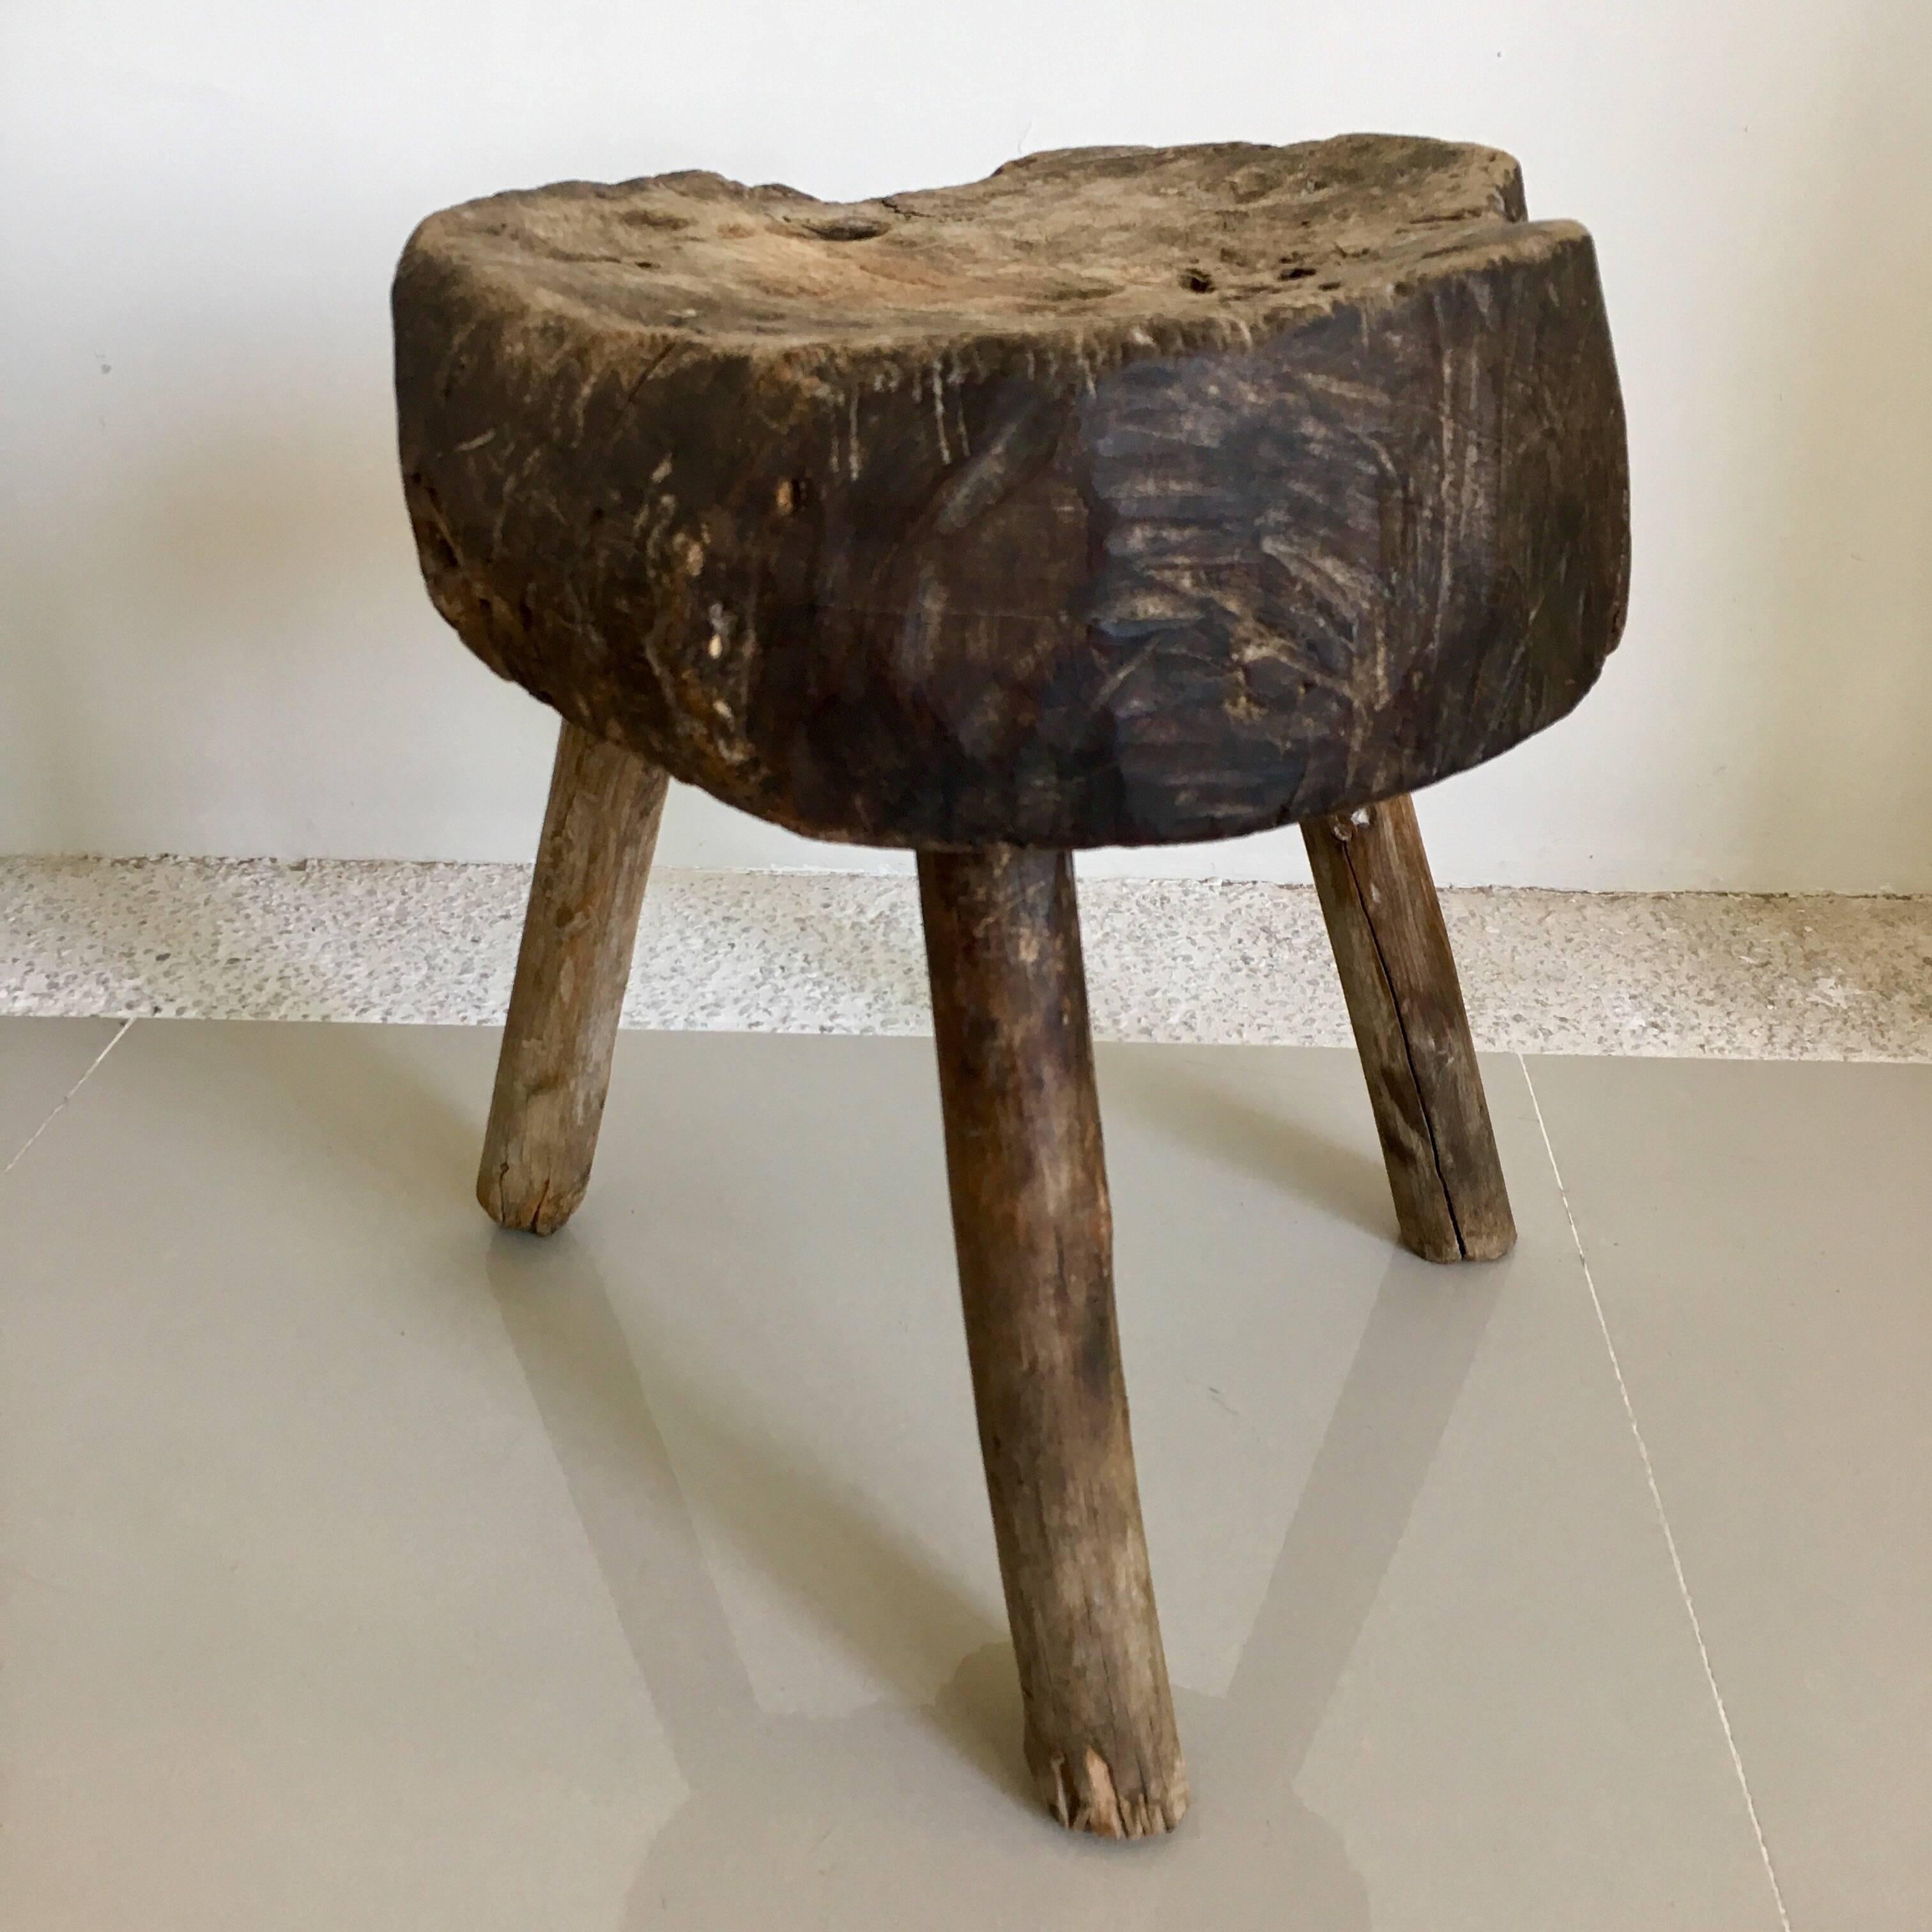 Primitive mesquite stool from the Guanajuato area of Mexico. Excellent patina and original legs. One of a kind object. Structure is sound and solid. Measure: Seat 4